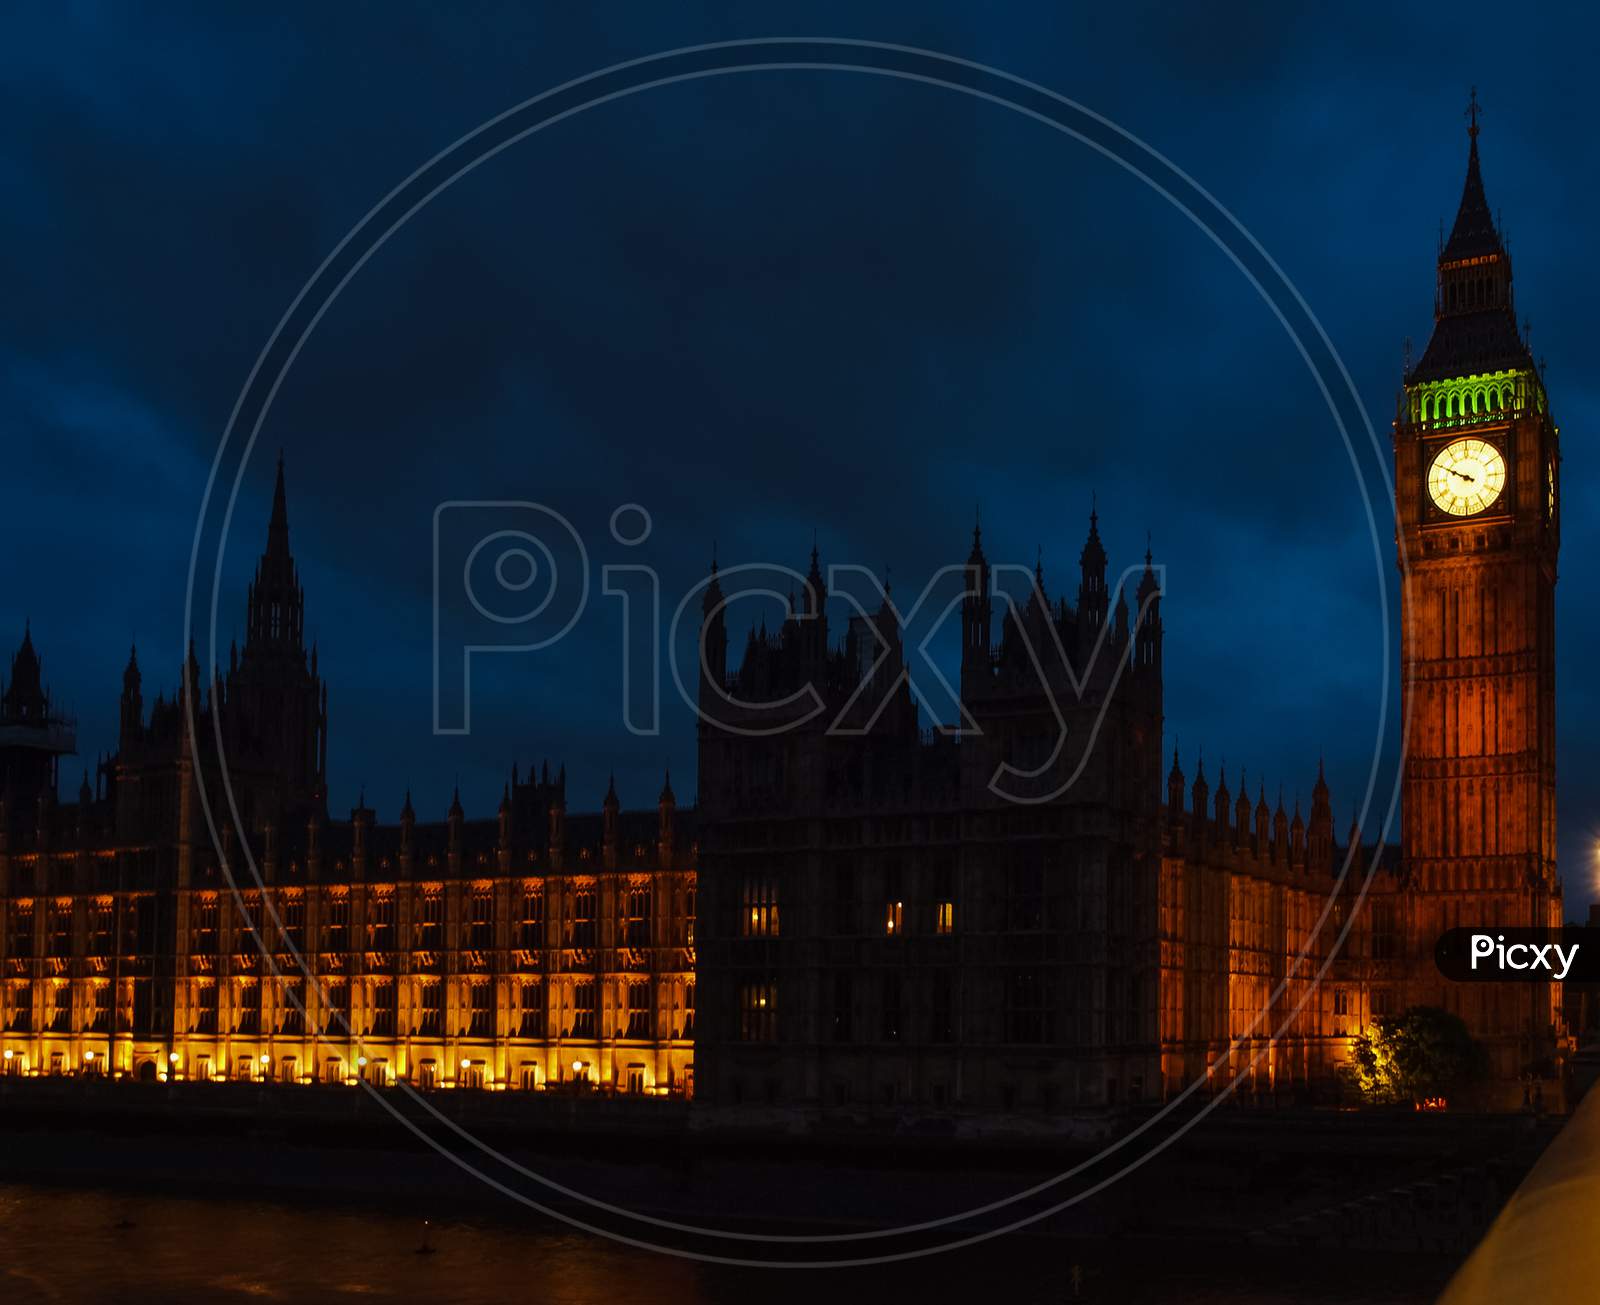 Houses Of Parliament In London